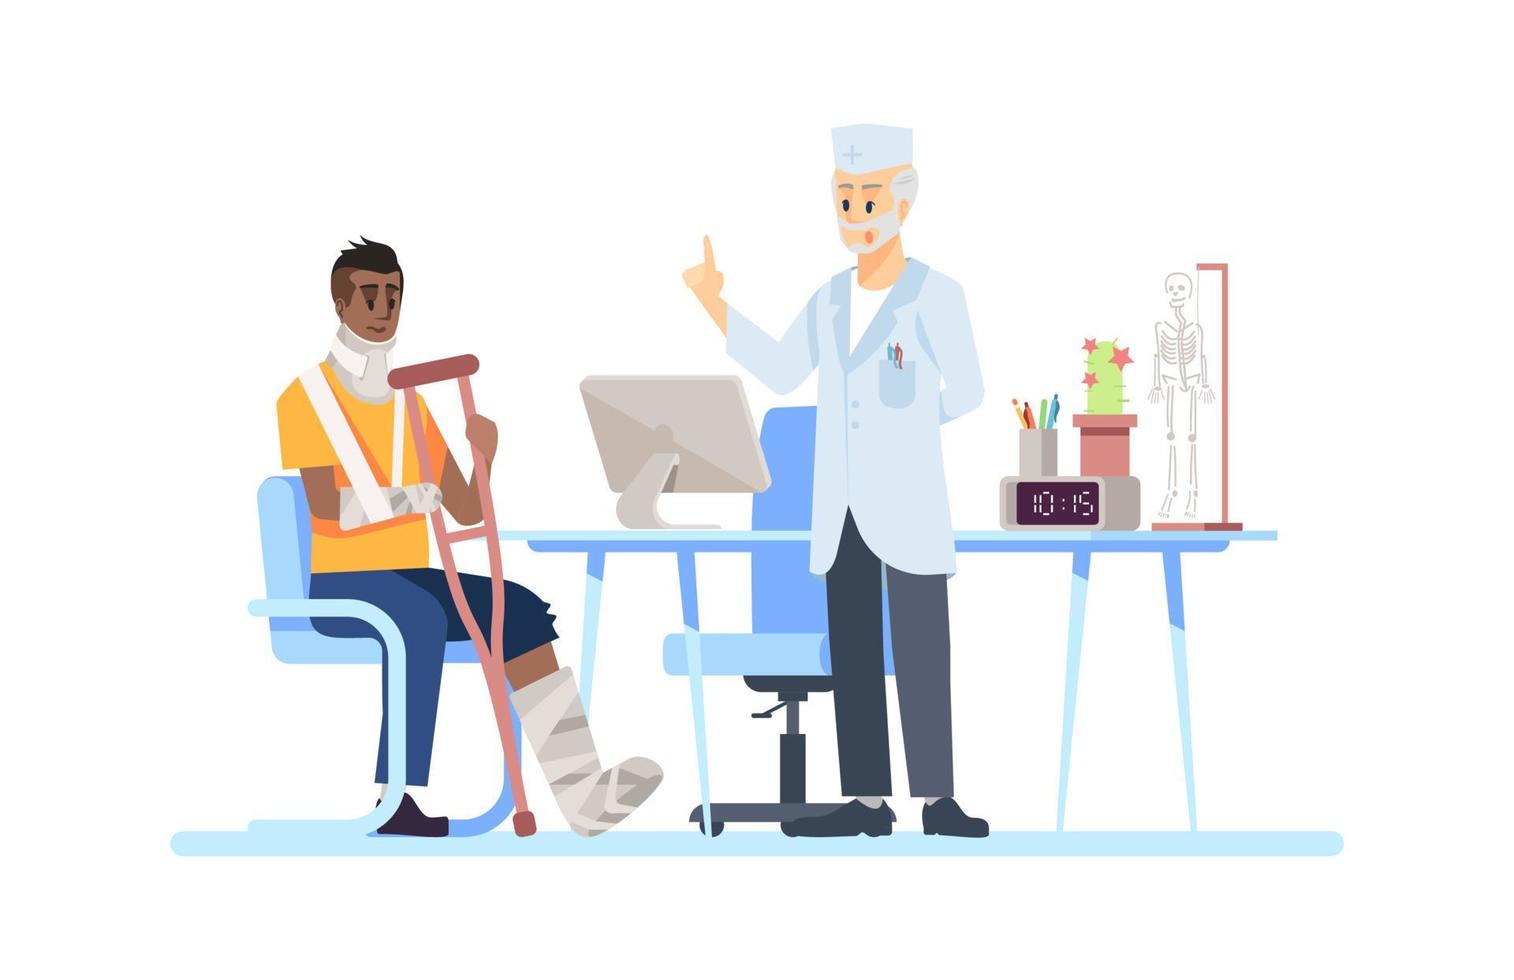 Visiting orthopedist doctor flat vector illustration. Surgeon, patient isolated cartoon characters on white background. Broken leg, arm, fracture. Crutch, plaster, bandage. Recovering after accident